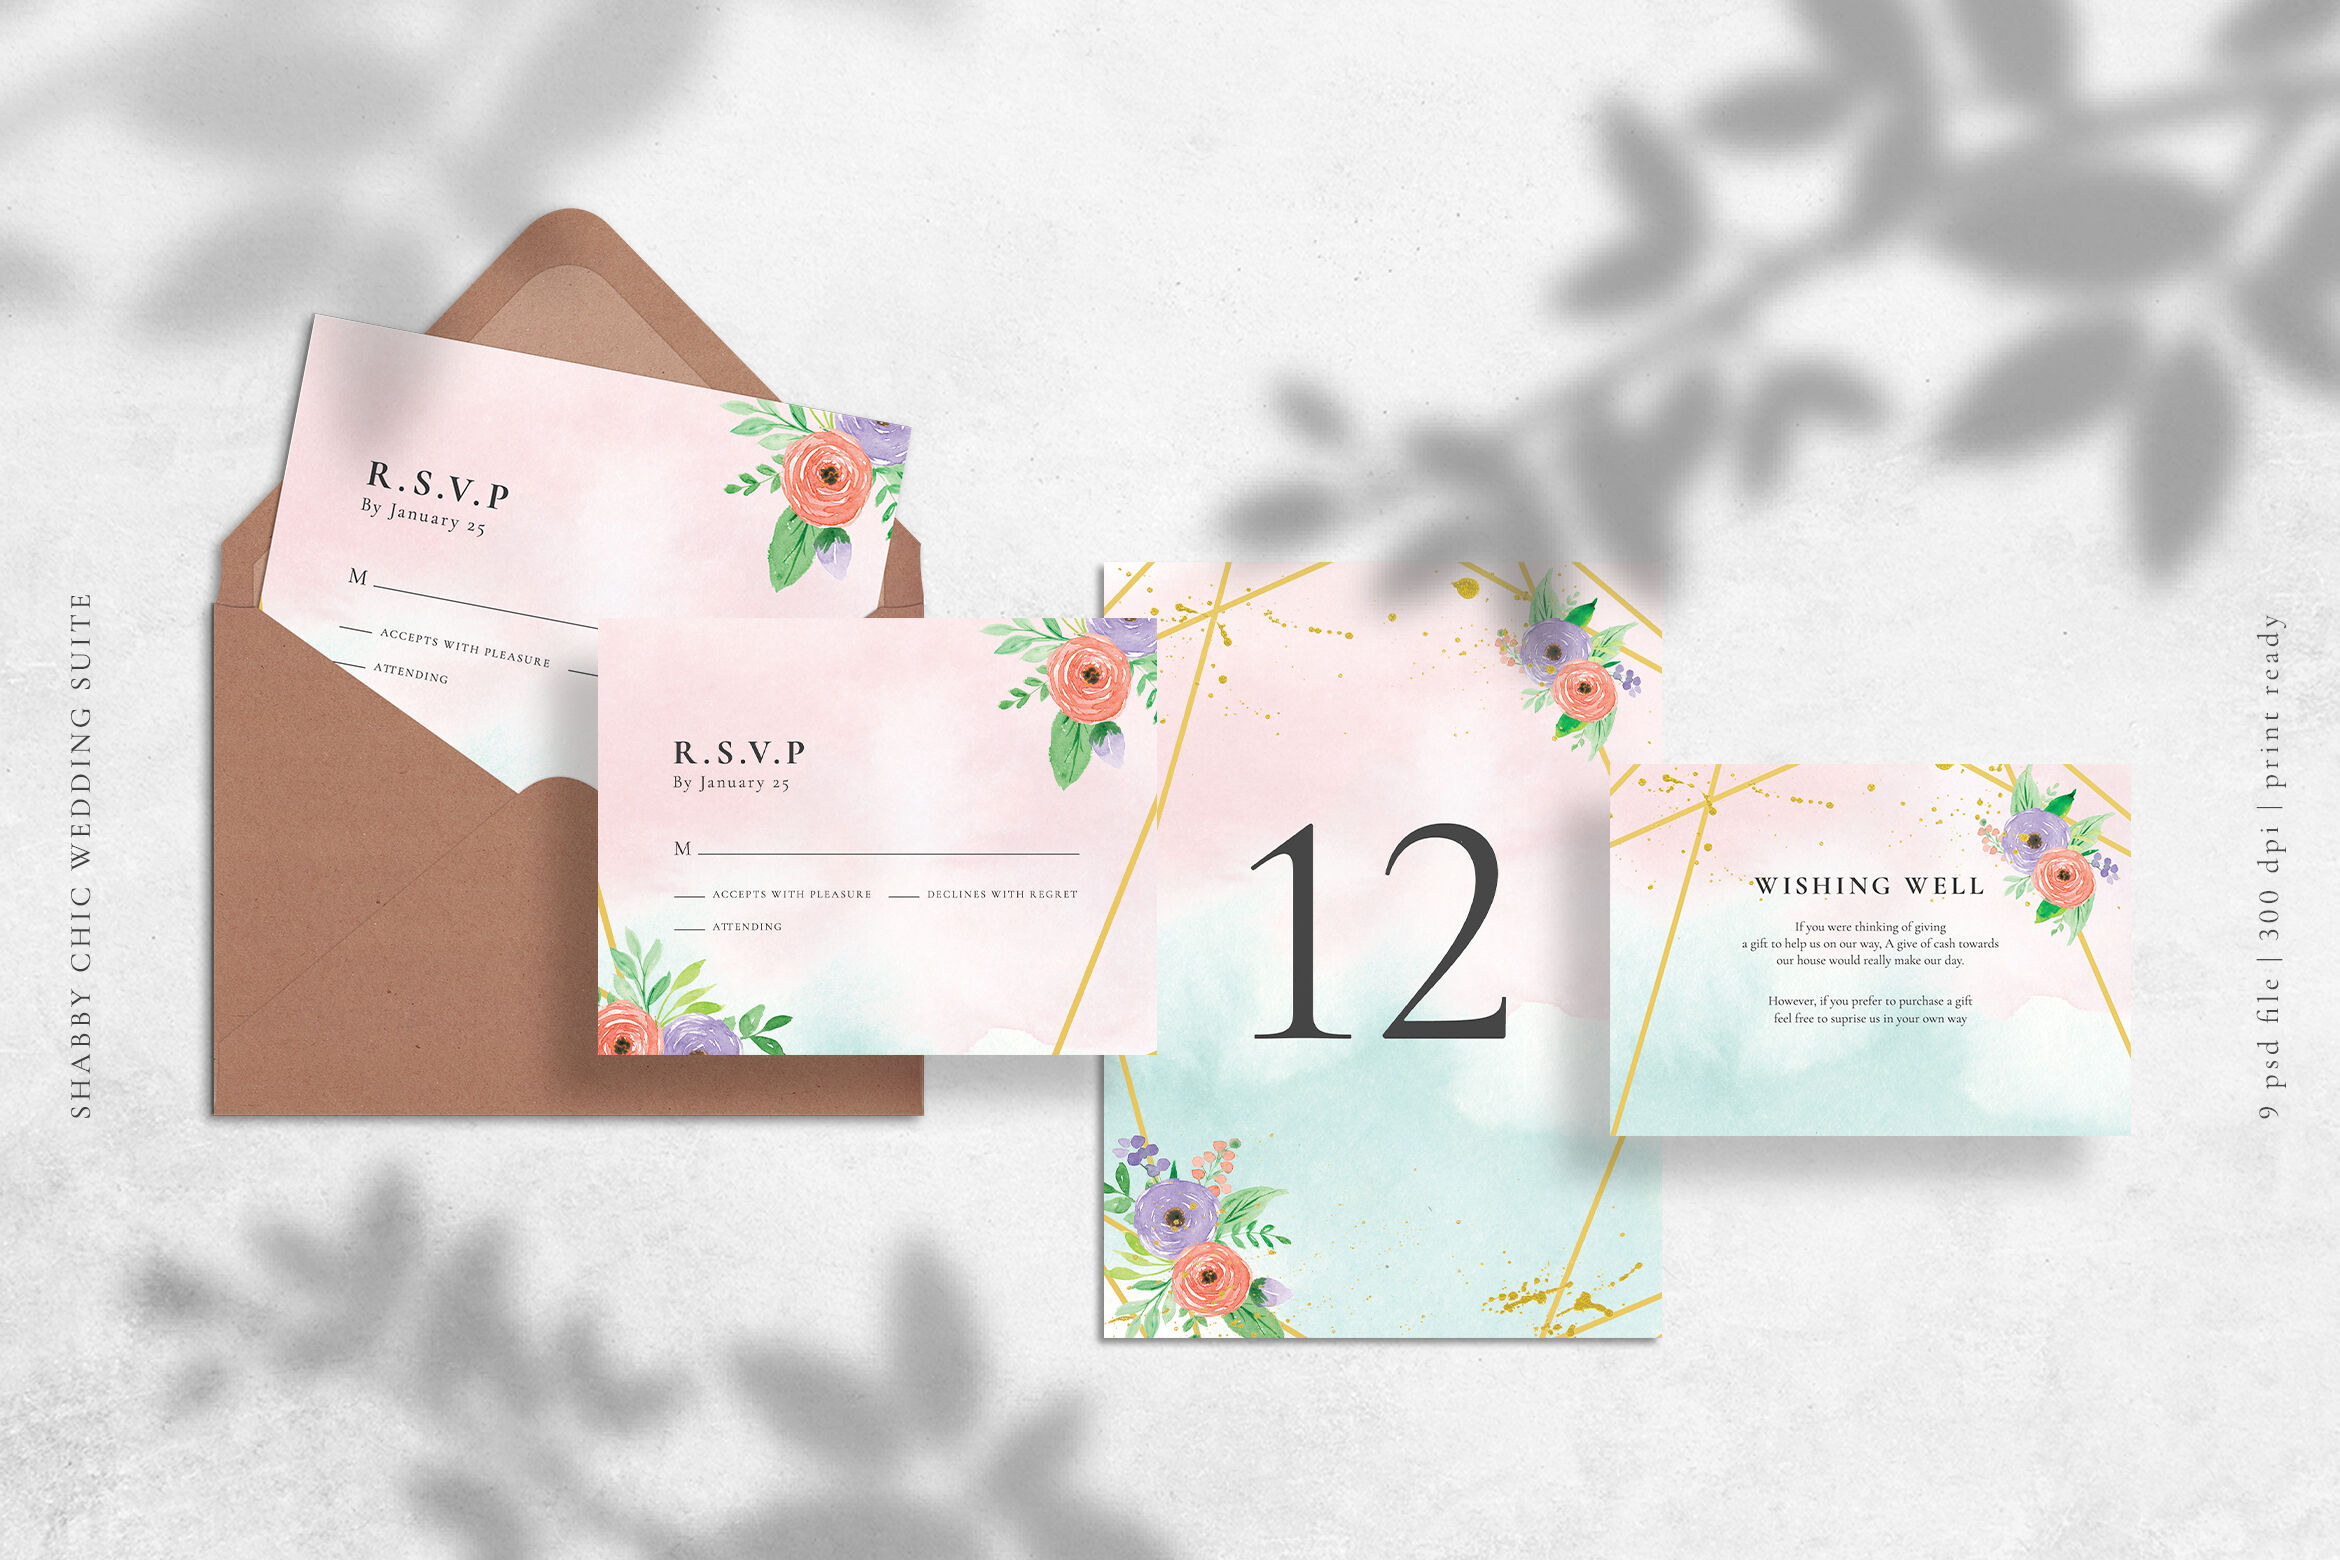 Download Save The Date Mockup Psd Free - Free Mockups | PSD Template | Design Assets